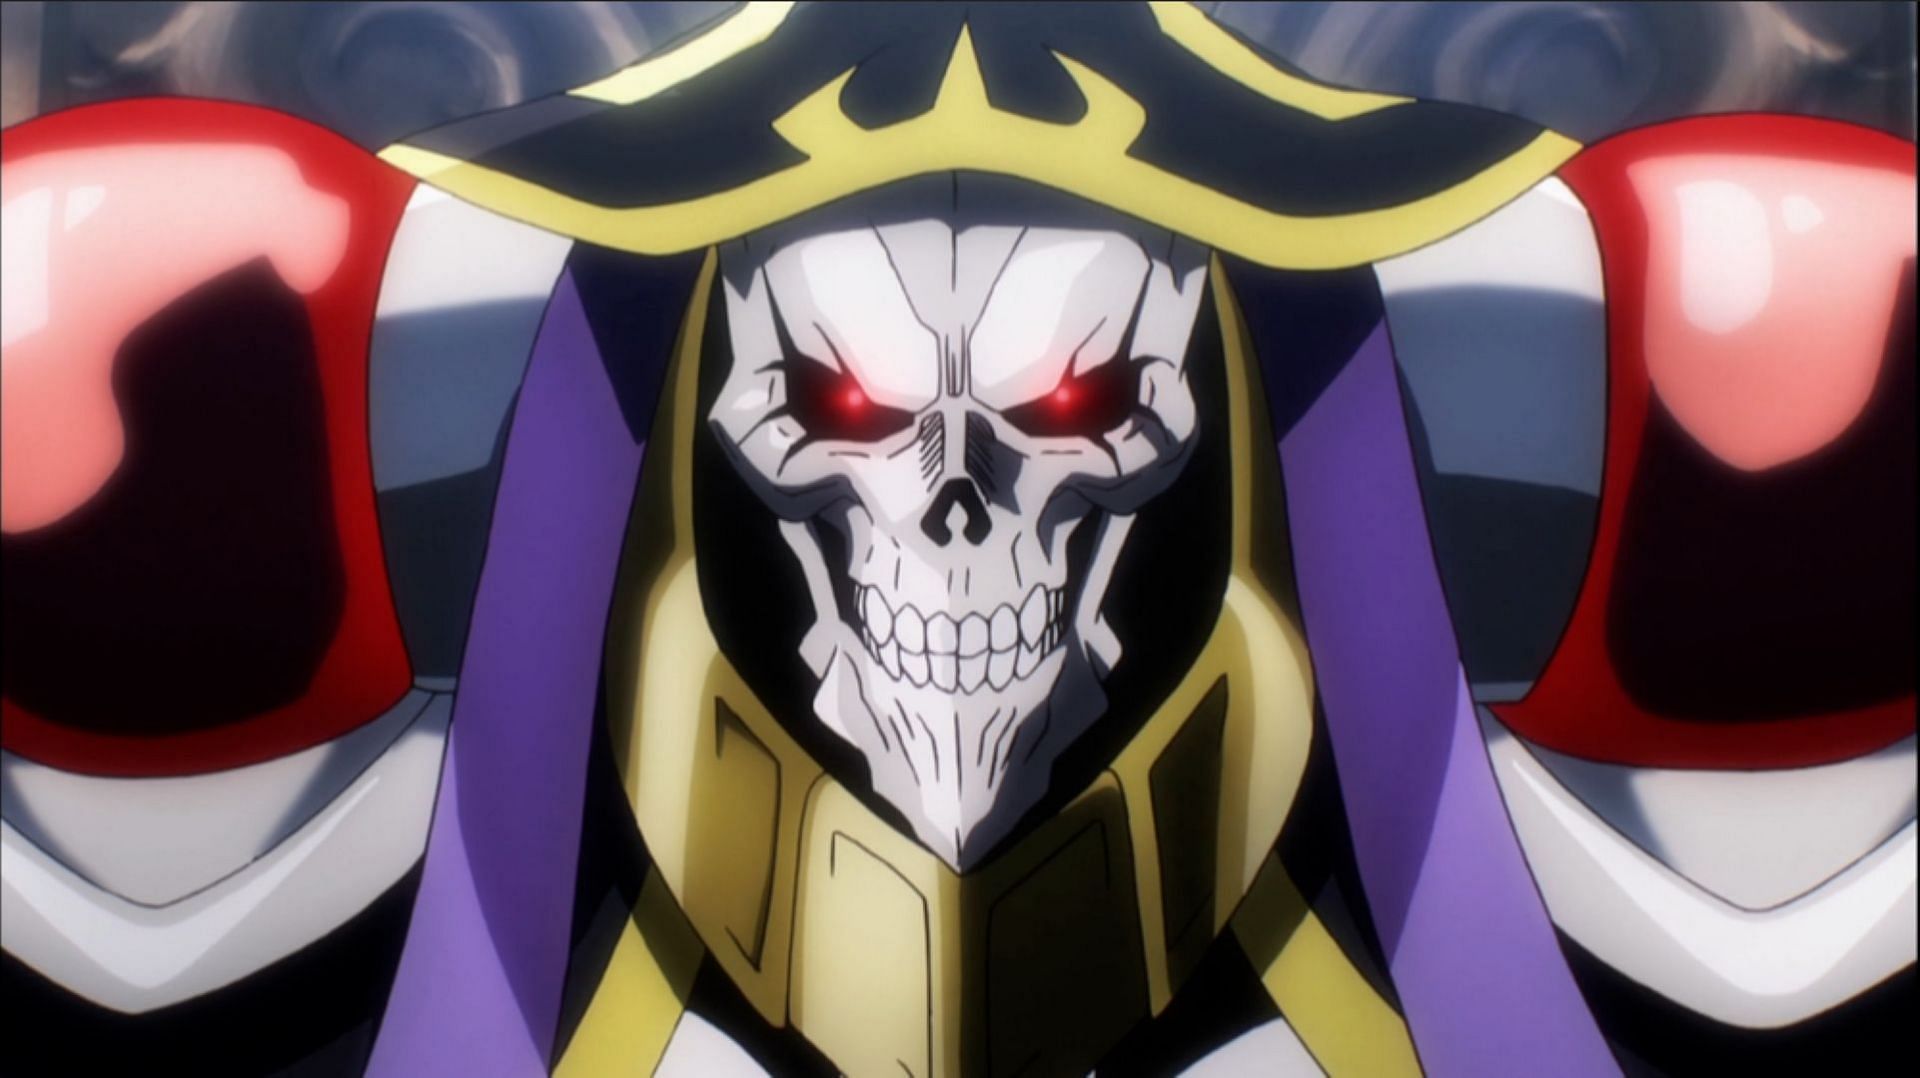 Ainz Ooal Gown in Overlord (Image via Studio Madhouse)